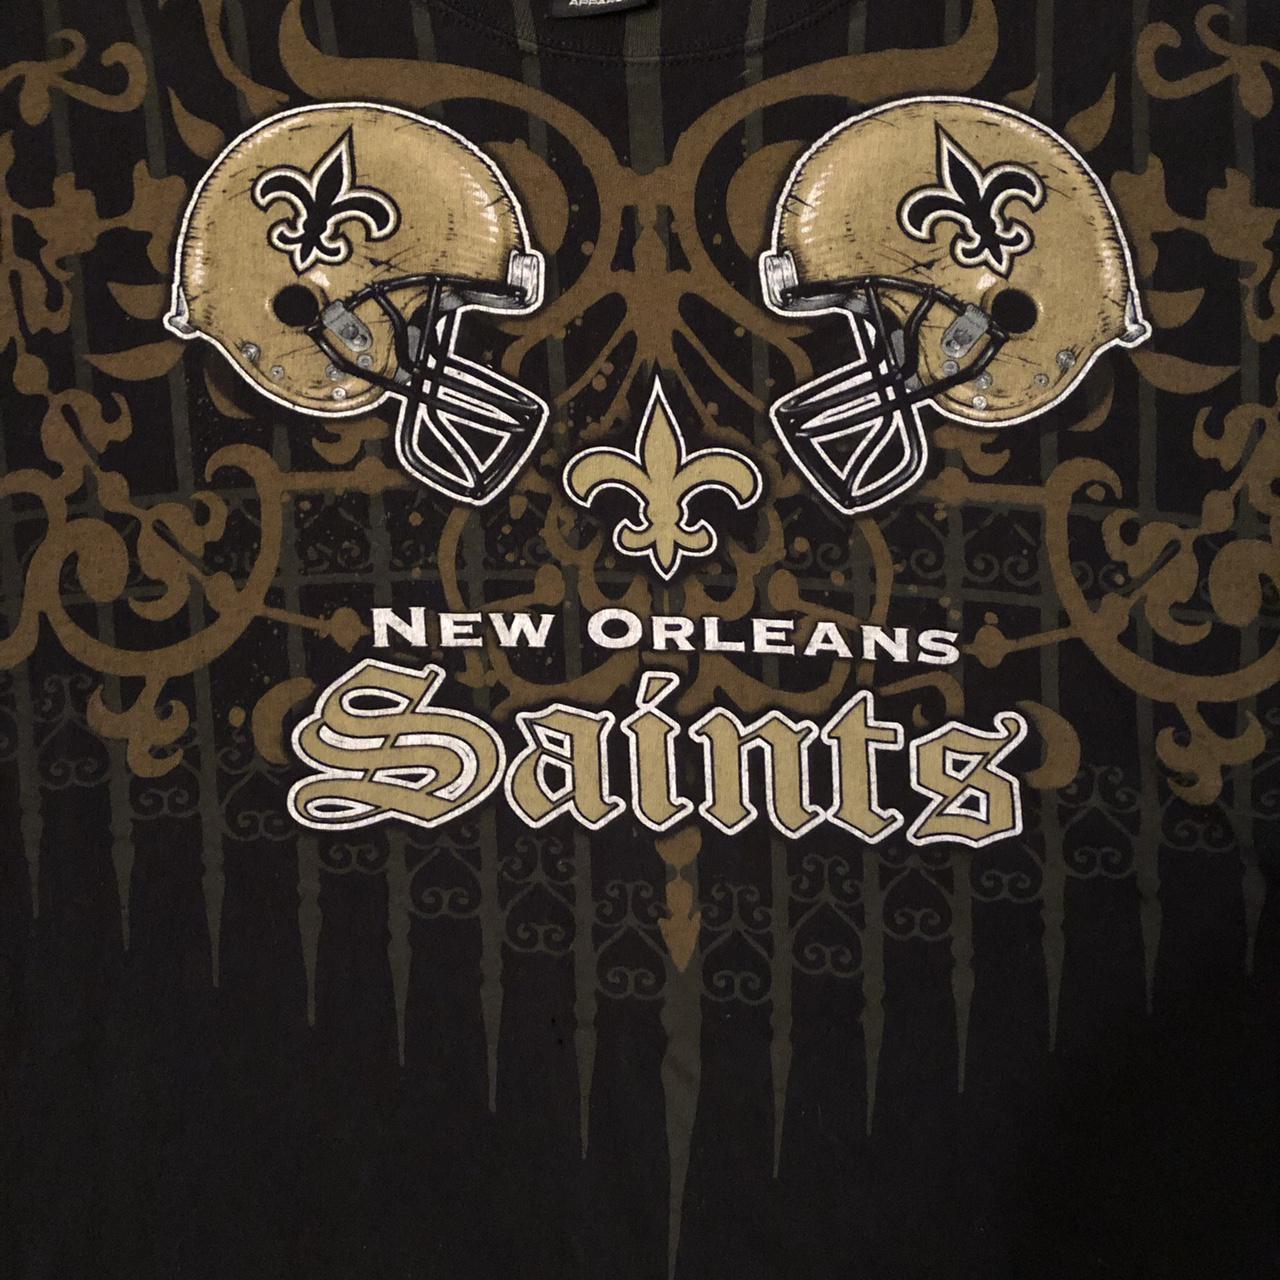 Product Image 2 - New Orleans saints nfl football